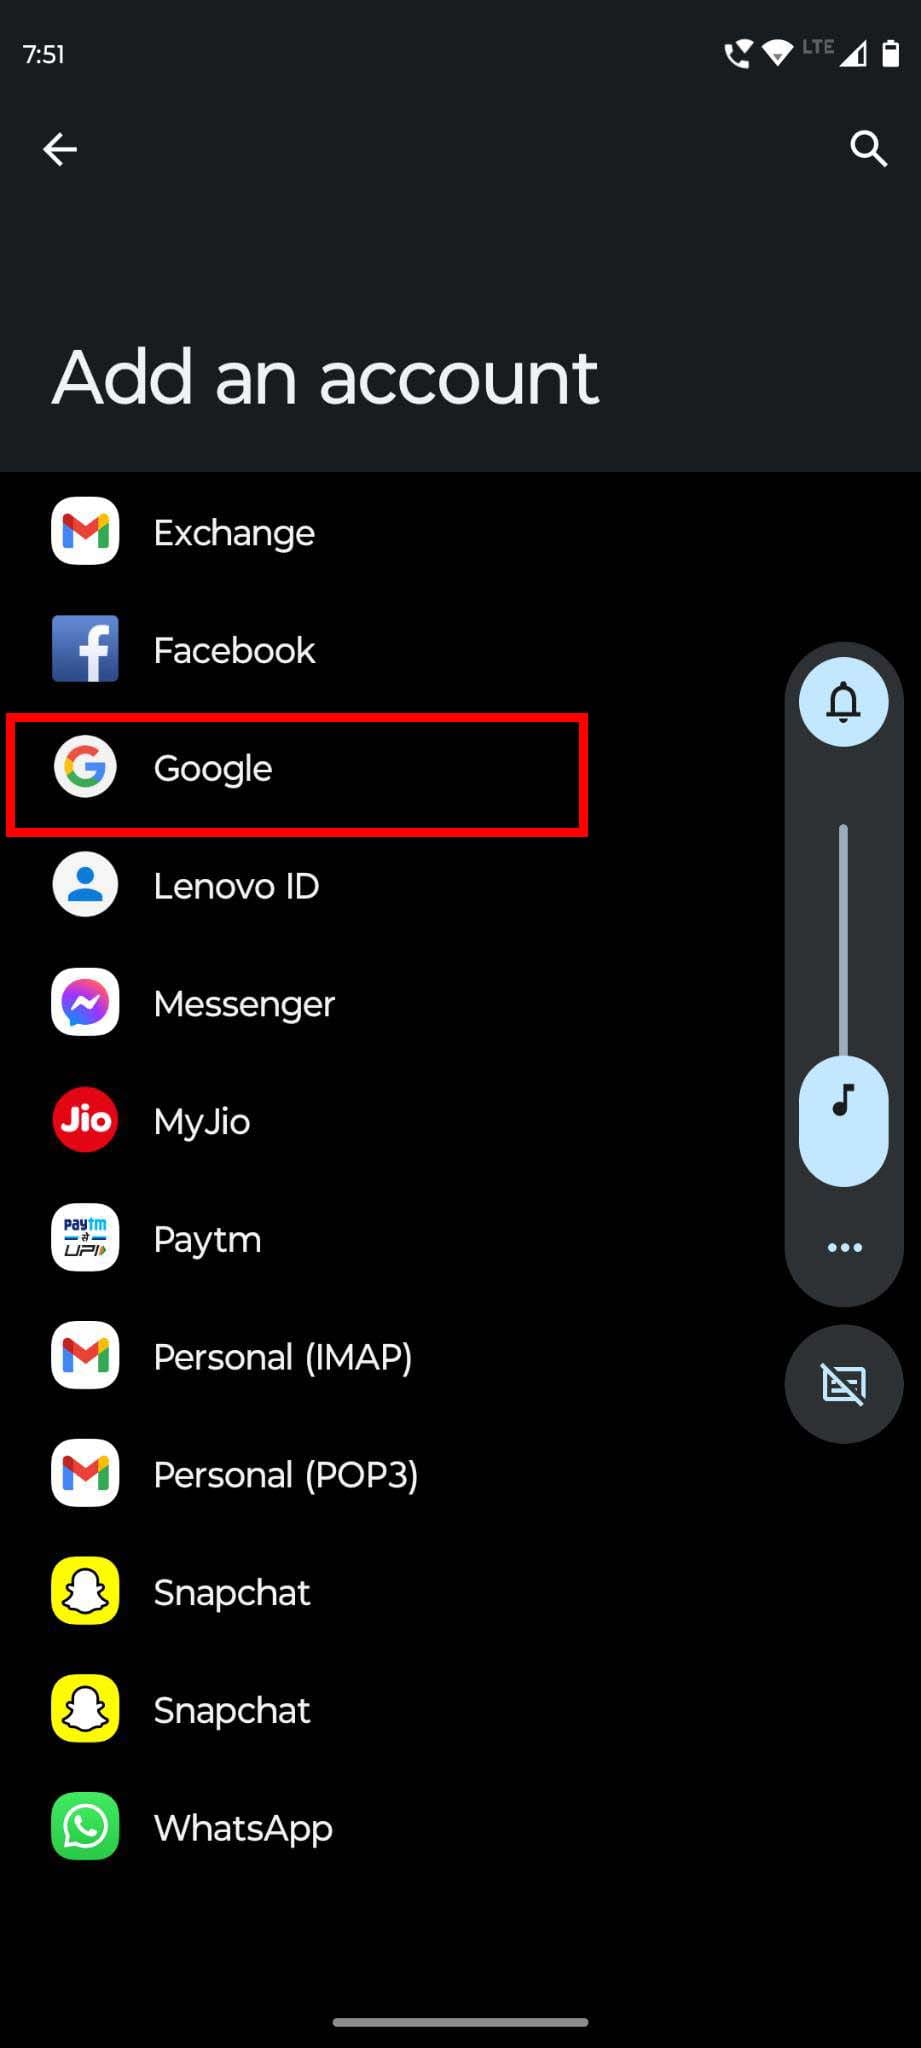 How to add an account in Android